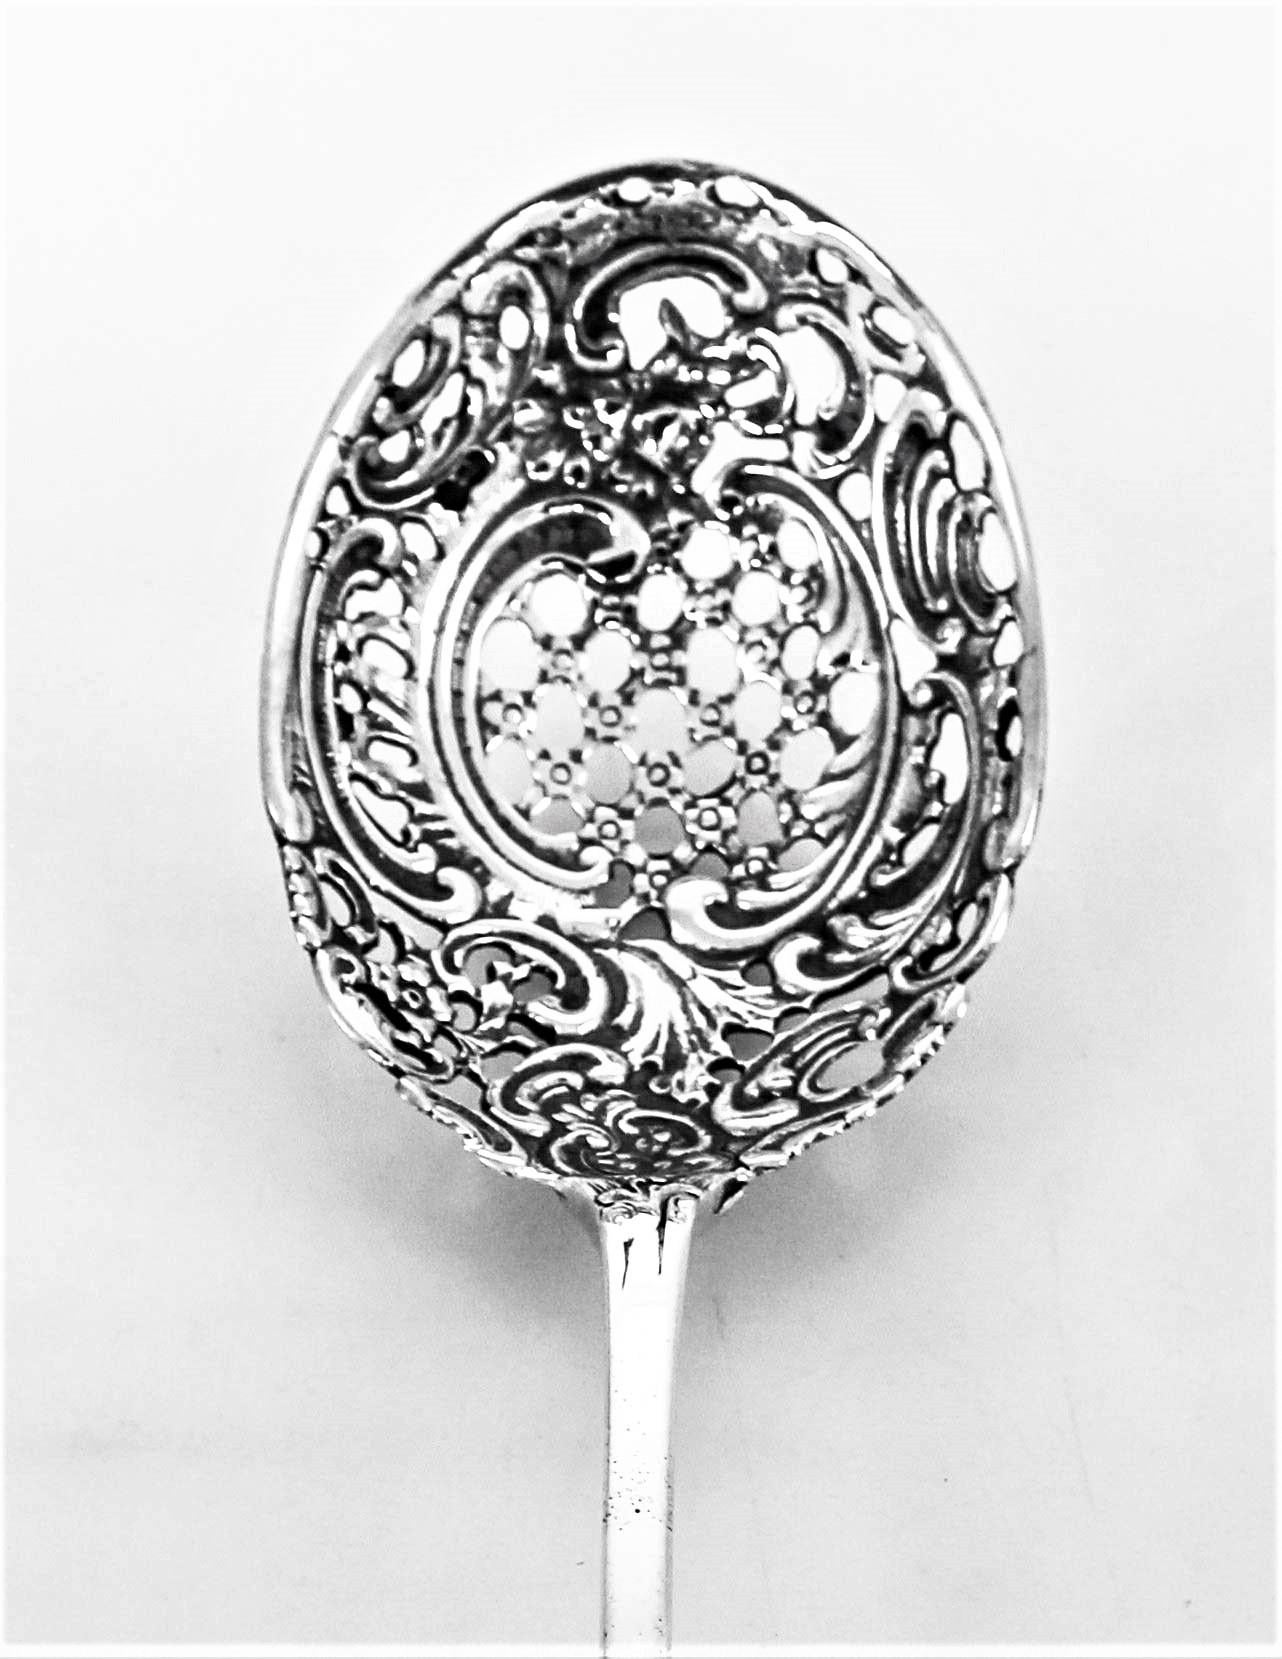 If you enjoy entertaining in style, you will love this super-large sterling silver pierced serving spoon. It has an extra long handle and delicate openwork on the end and bowl part of the spoon. Flowers and latticework work come together to form a